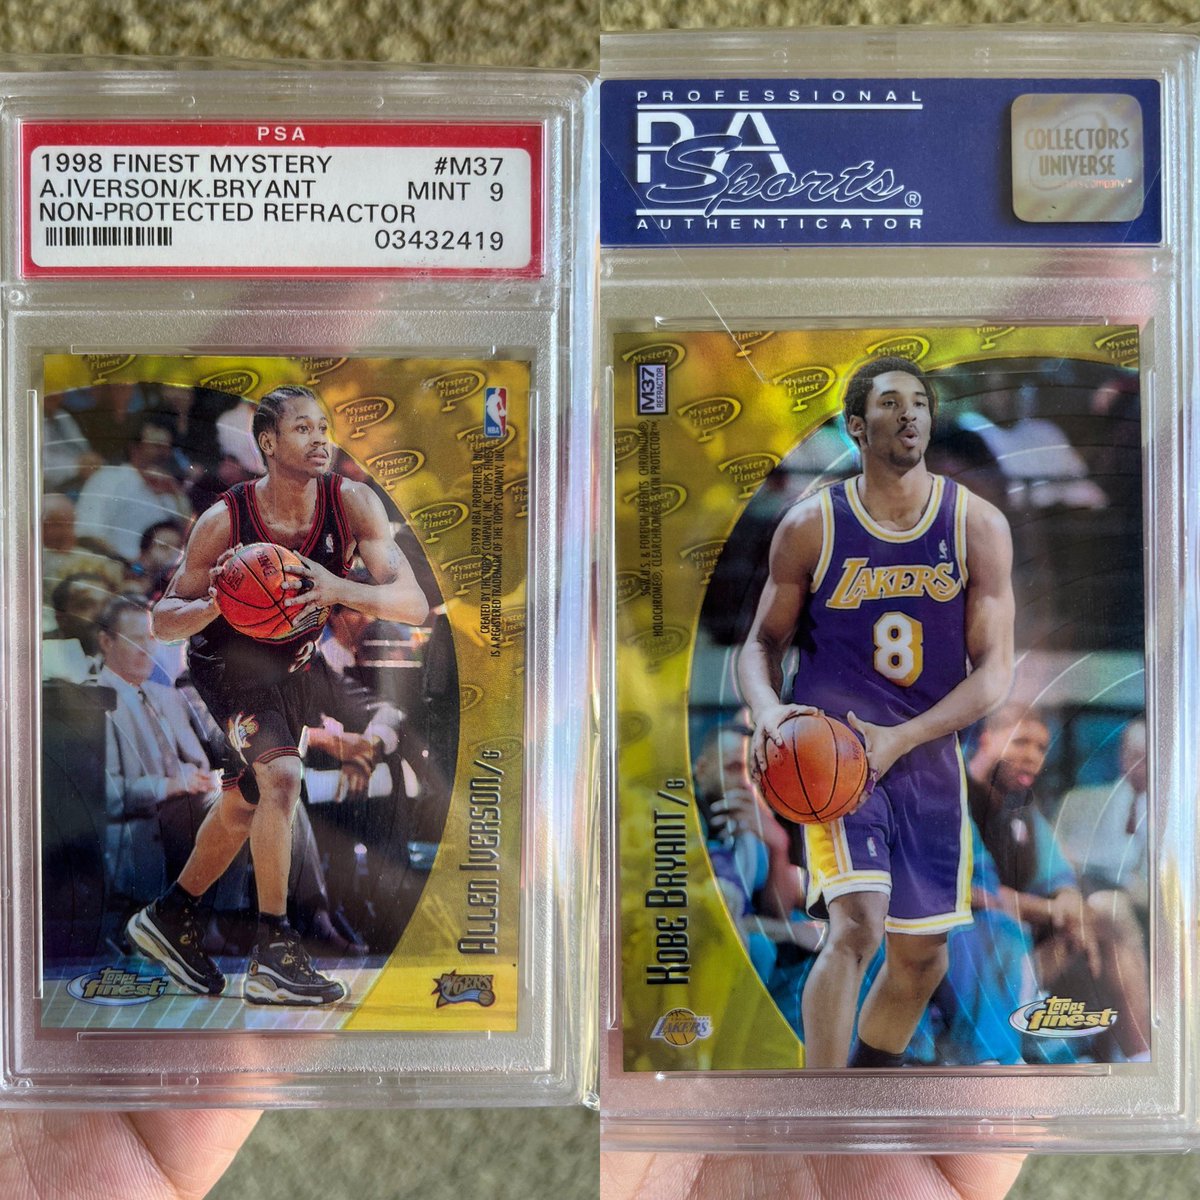 Fathers Day Deal 🔥
• Kobe / Iverson 1998 mystery finest refractor 🔥
• POP 2

$450 SHIPPED USPS 

WILL INCLUDE Kobe & Iverson RCs 👍